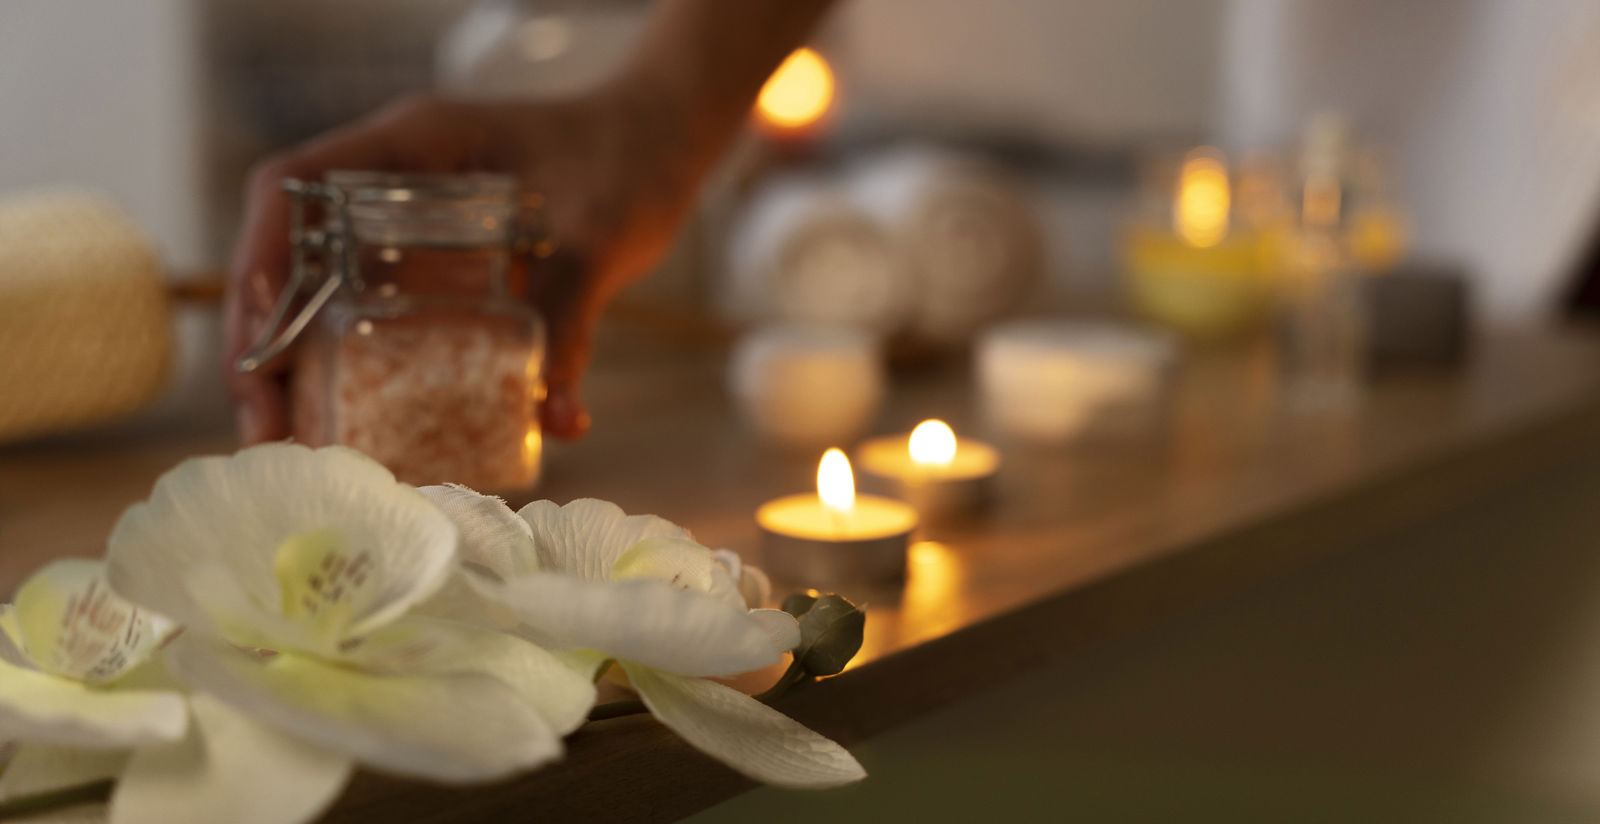 Infinito Resort - Massages & Beauty Treatments price list 19